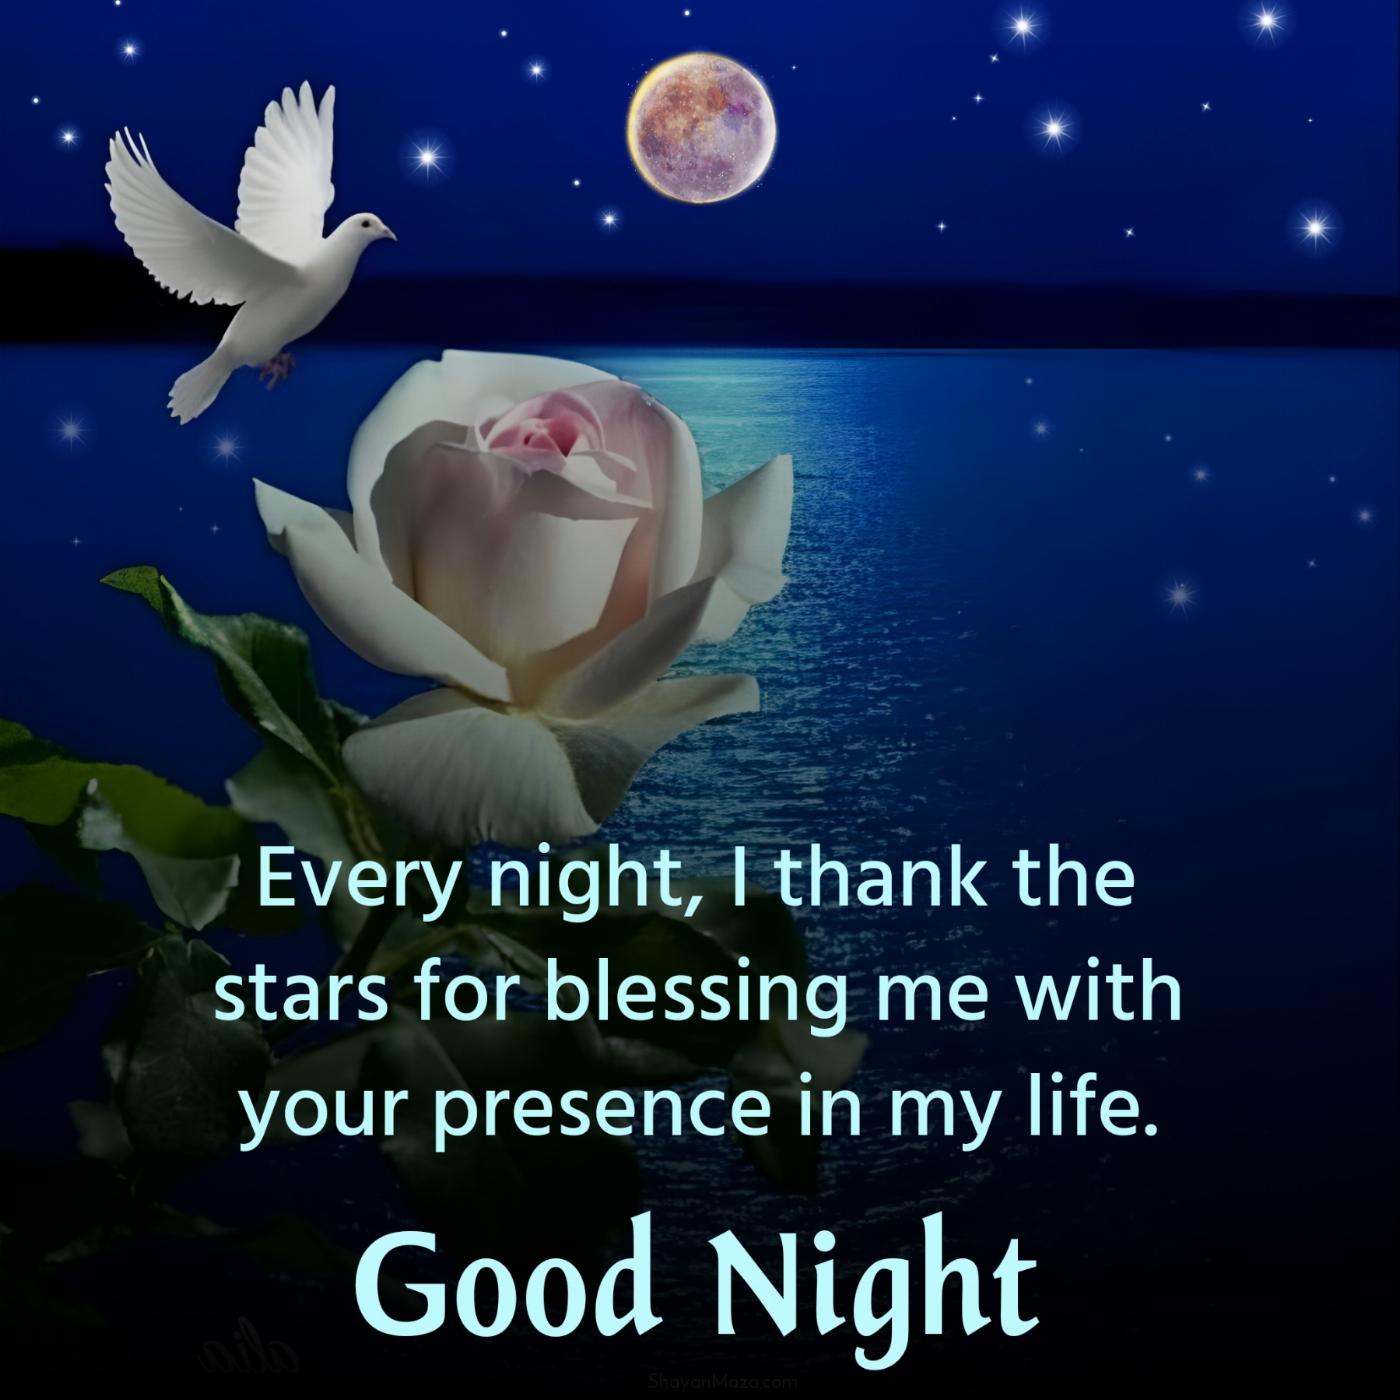 Every night I thank the stars for blessing me with your presence